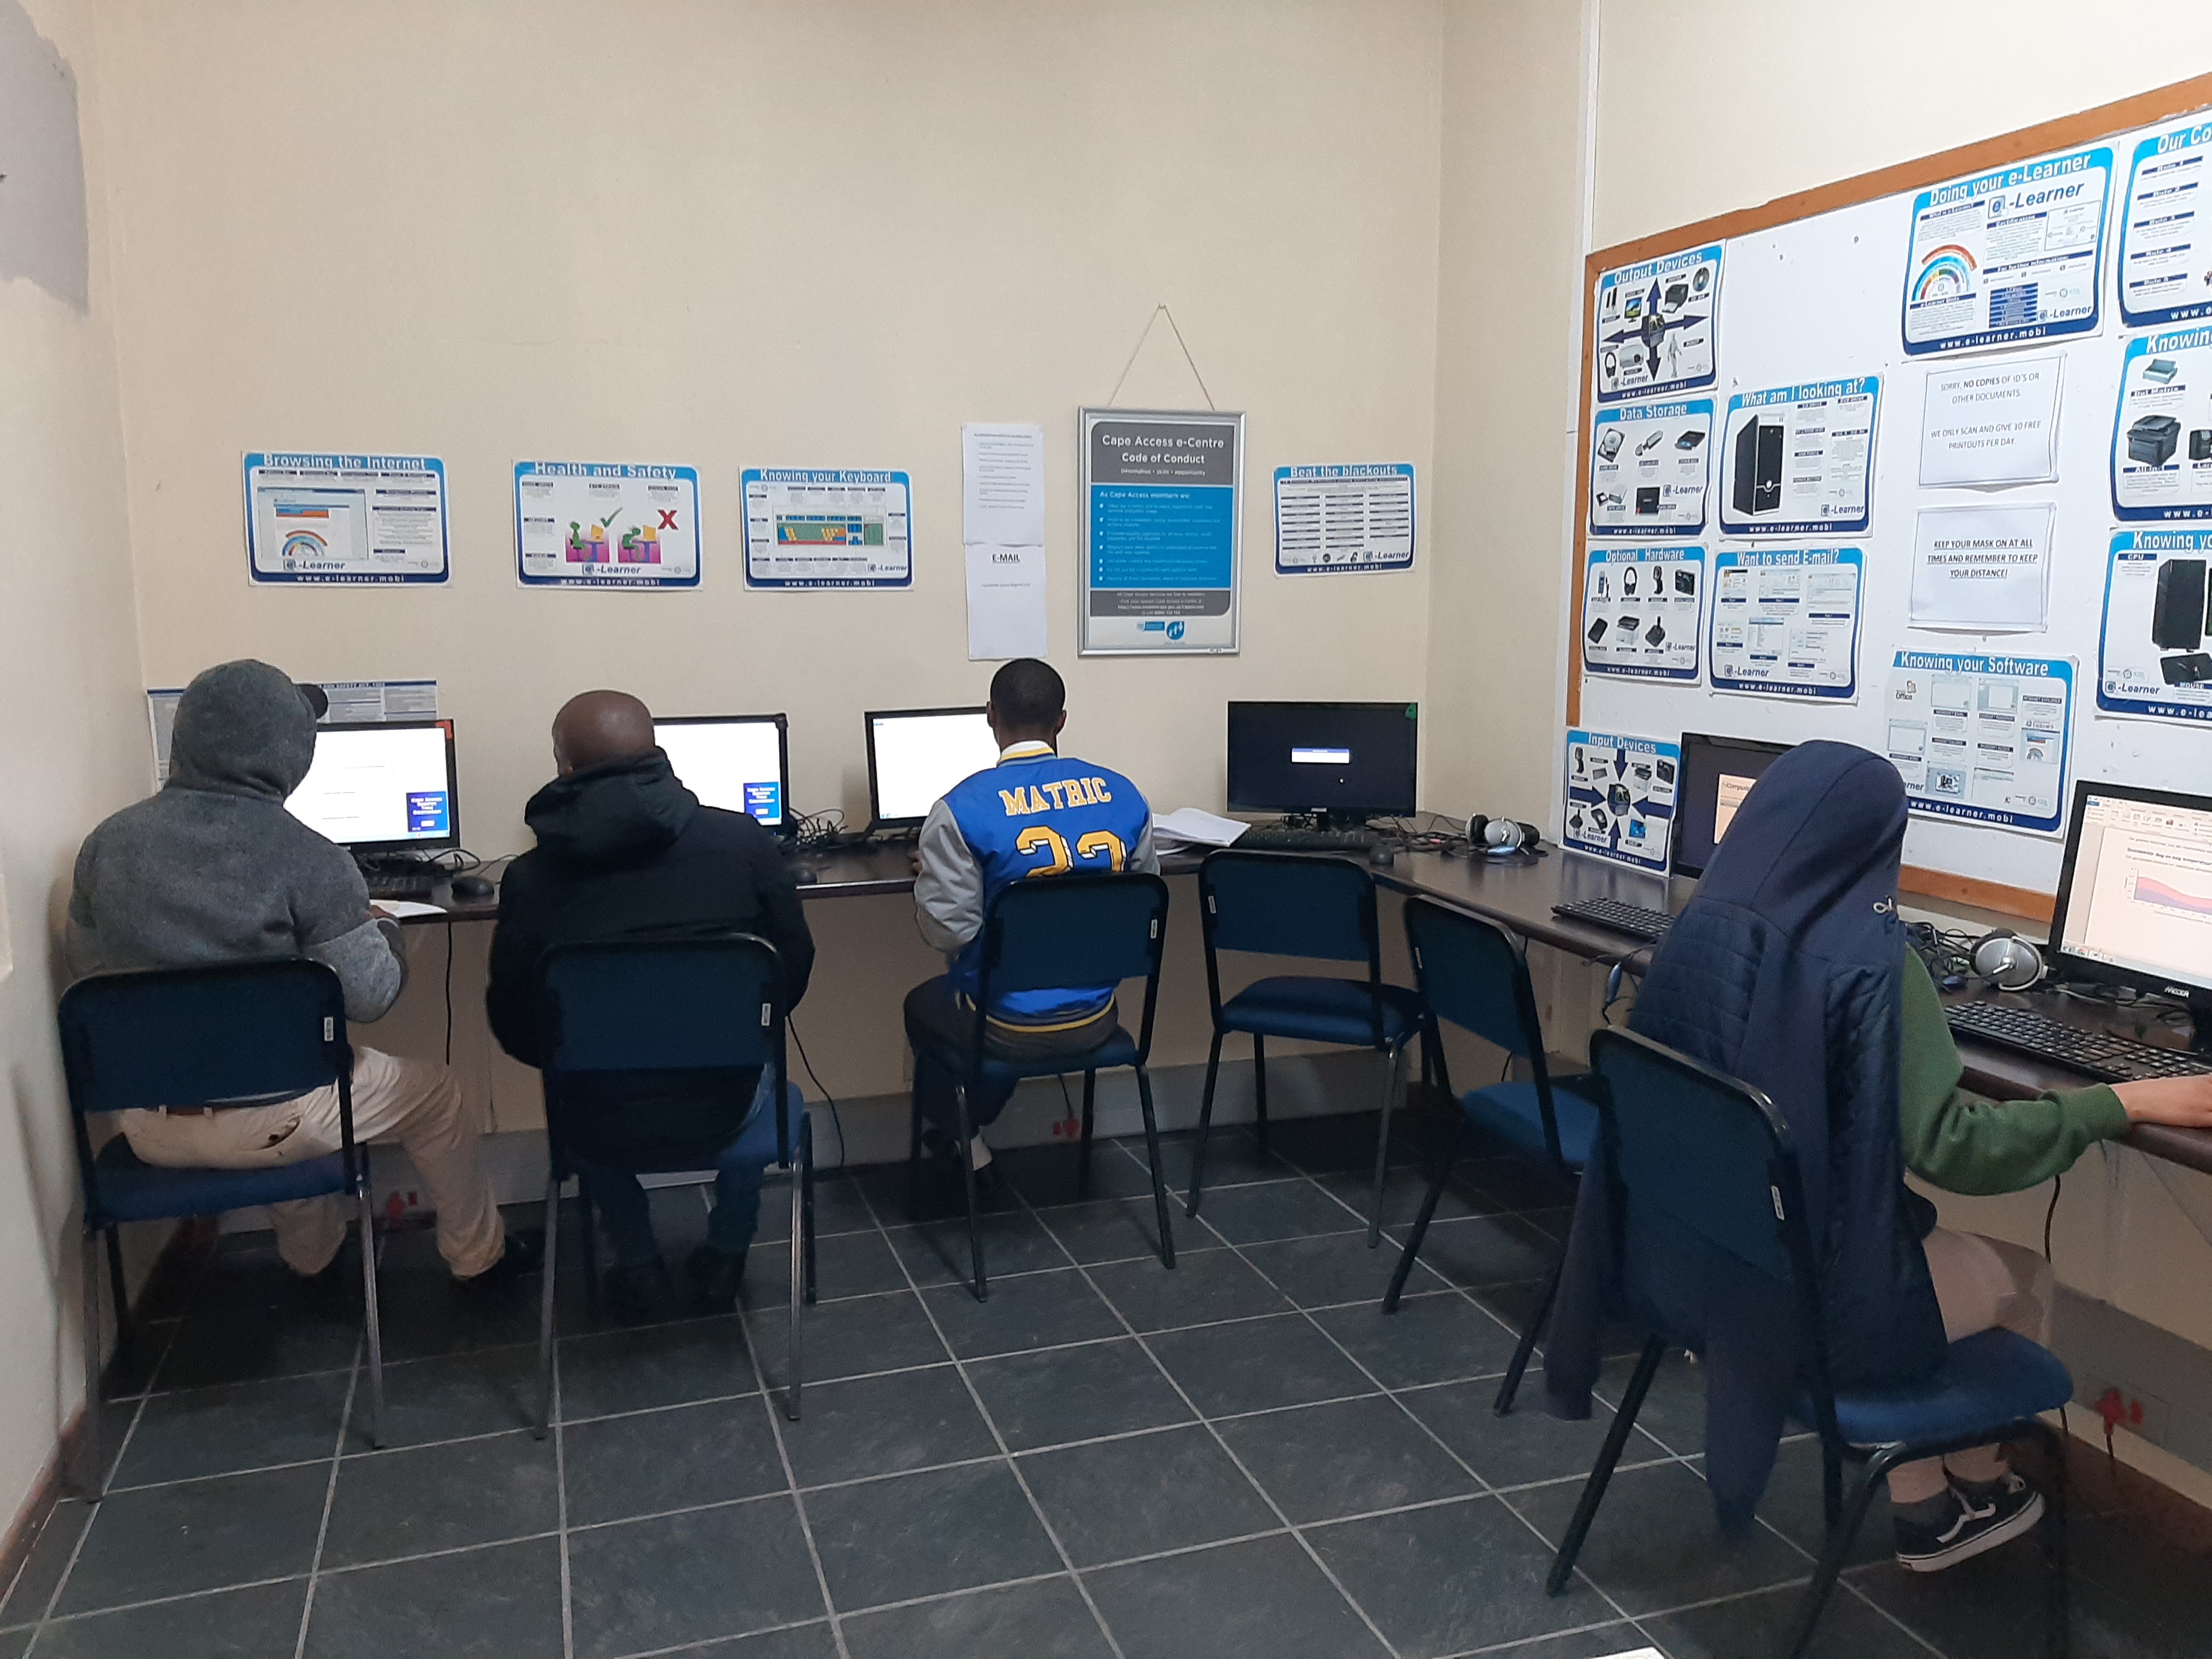 Students using the WCG eCentre computers